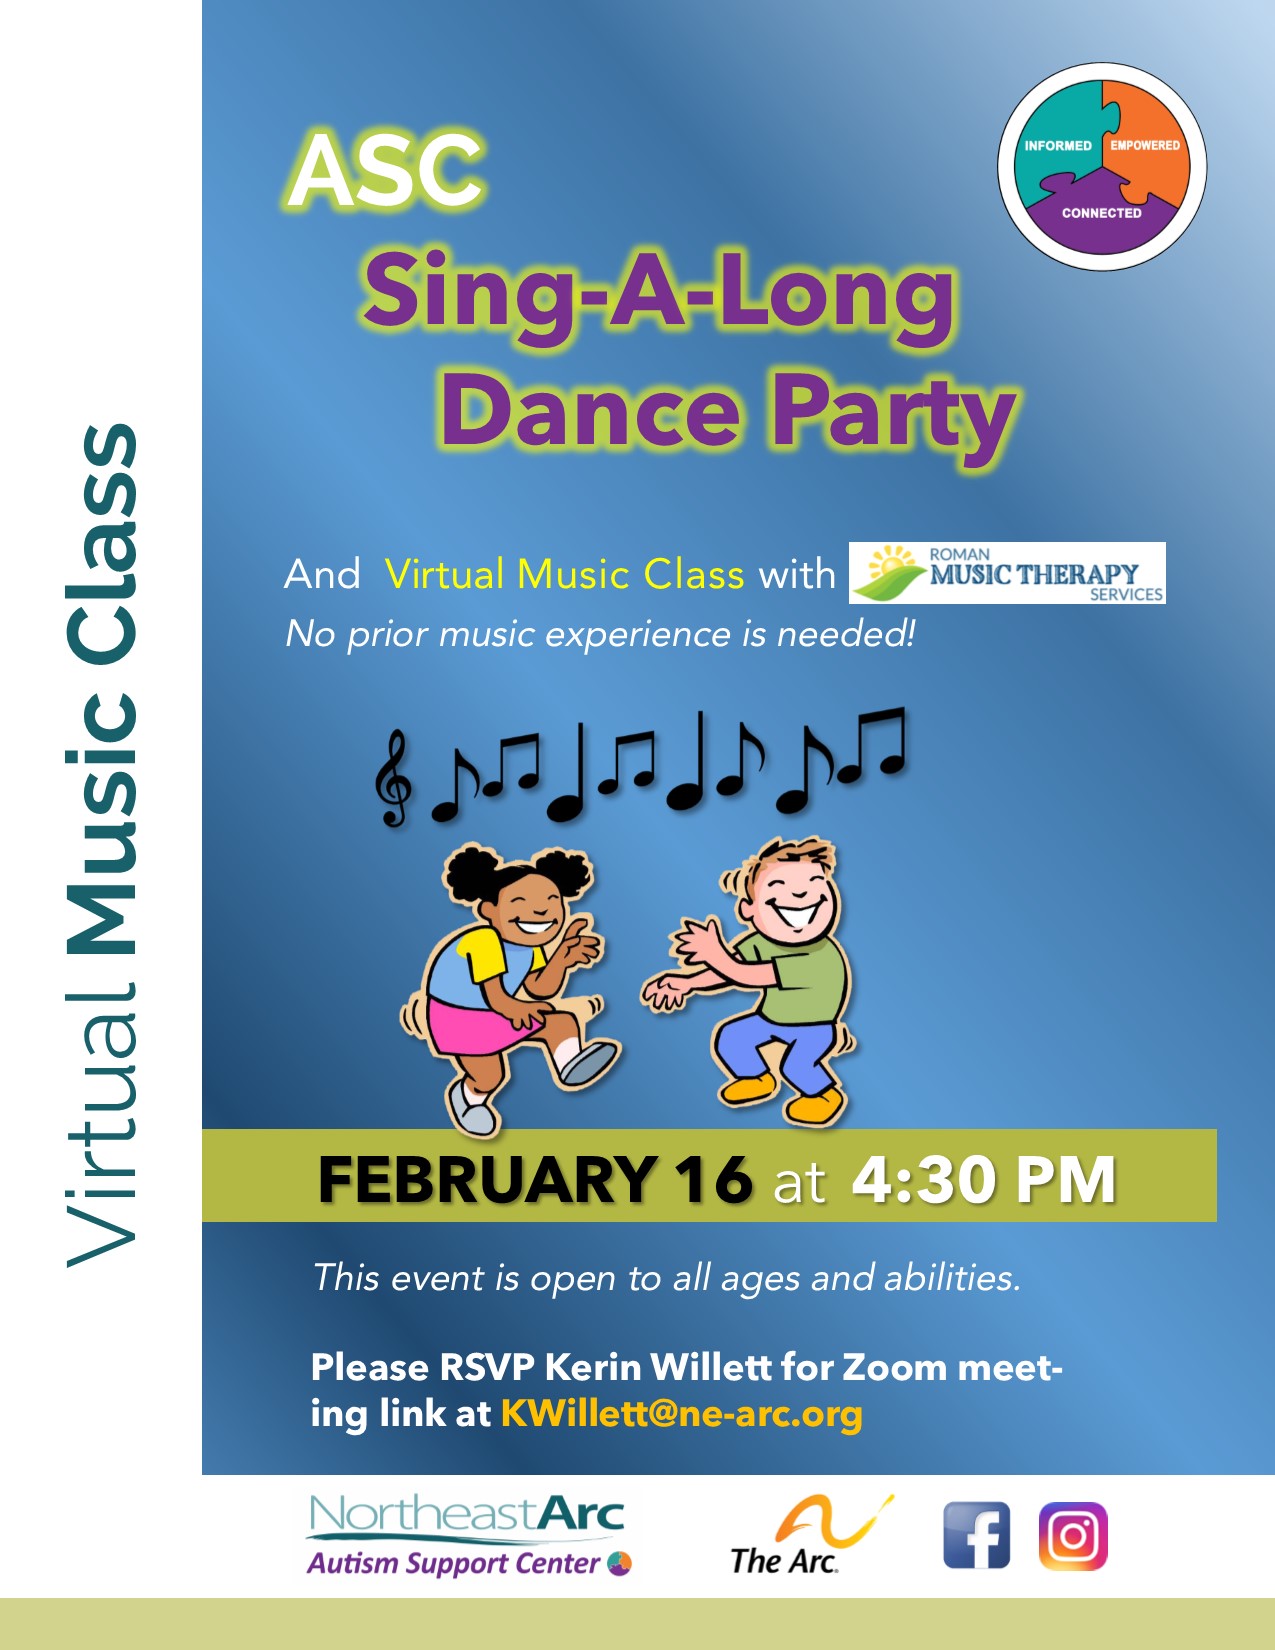 Flyer for Autism Support Center Virtual Sing-A-Long Dance Party on February 16 at 4:30PM. All ages and abilities are welcome. Contact Kerin Willett for Zoom meeting link at KWillett@ne-arc.org.